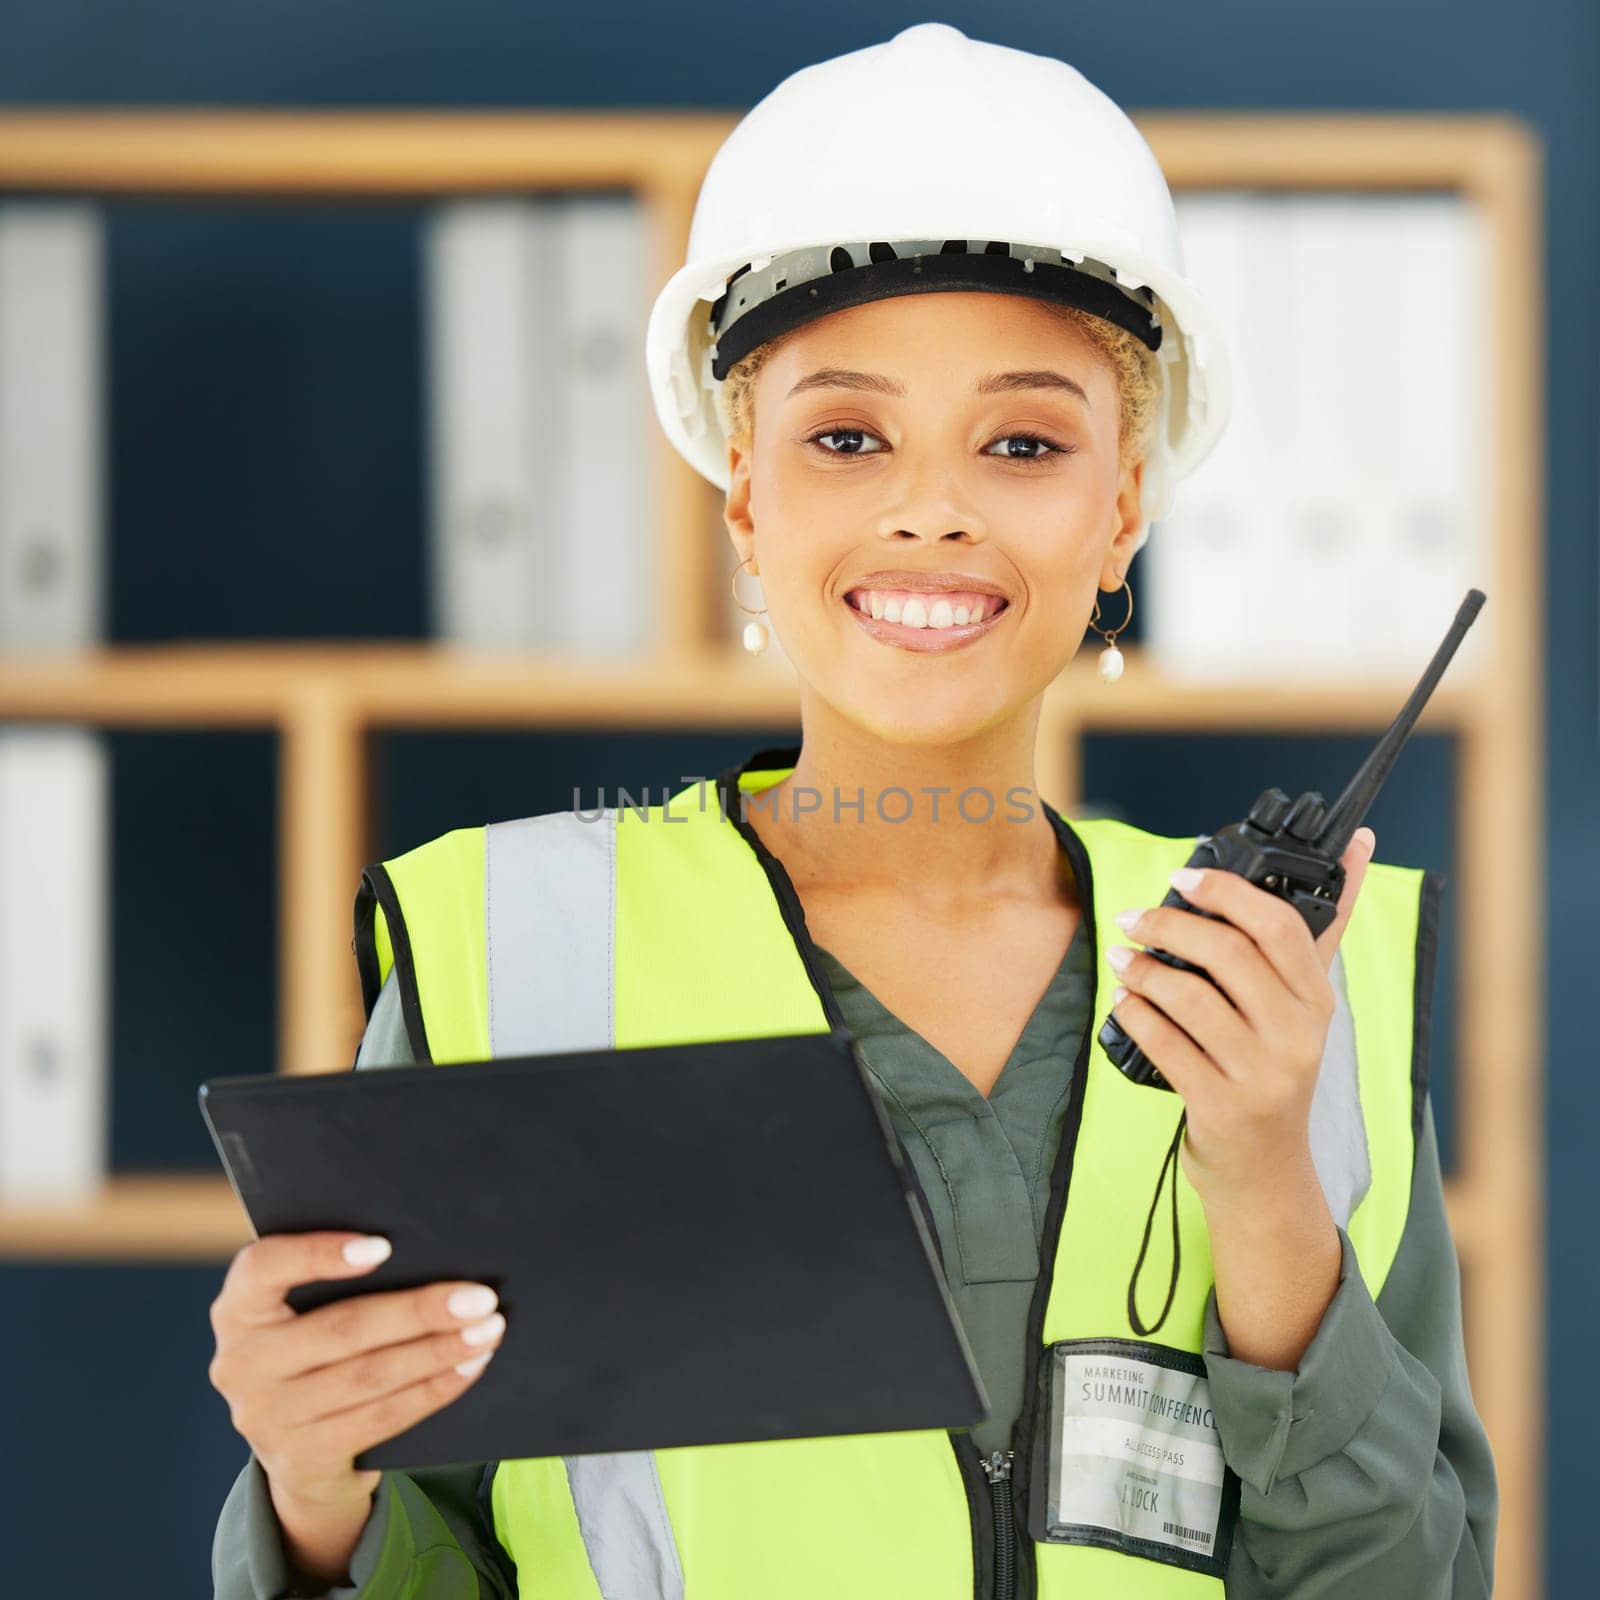 Construction, walkie talkie and portrait of black woman with tablet for engineering, building and architecture. Leadership, vision and female construction worker with digital tech for communication.